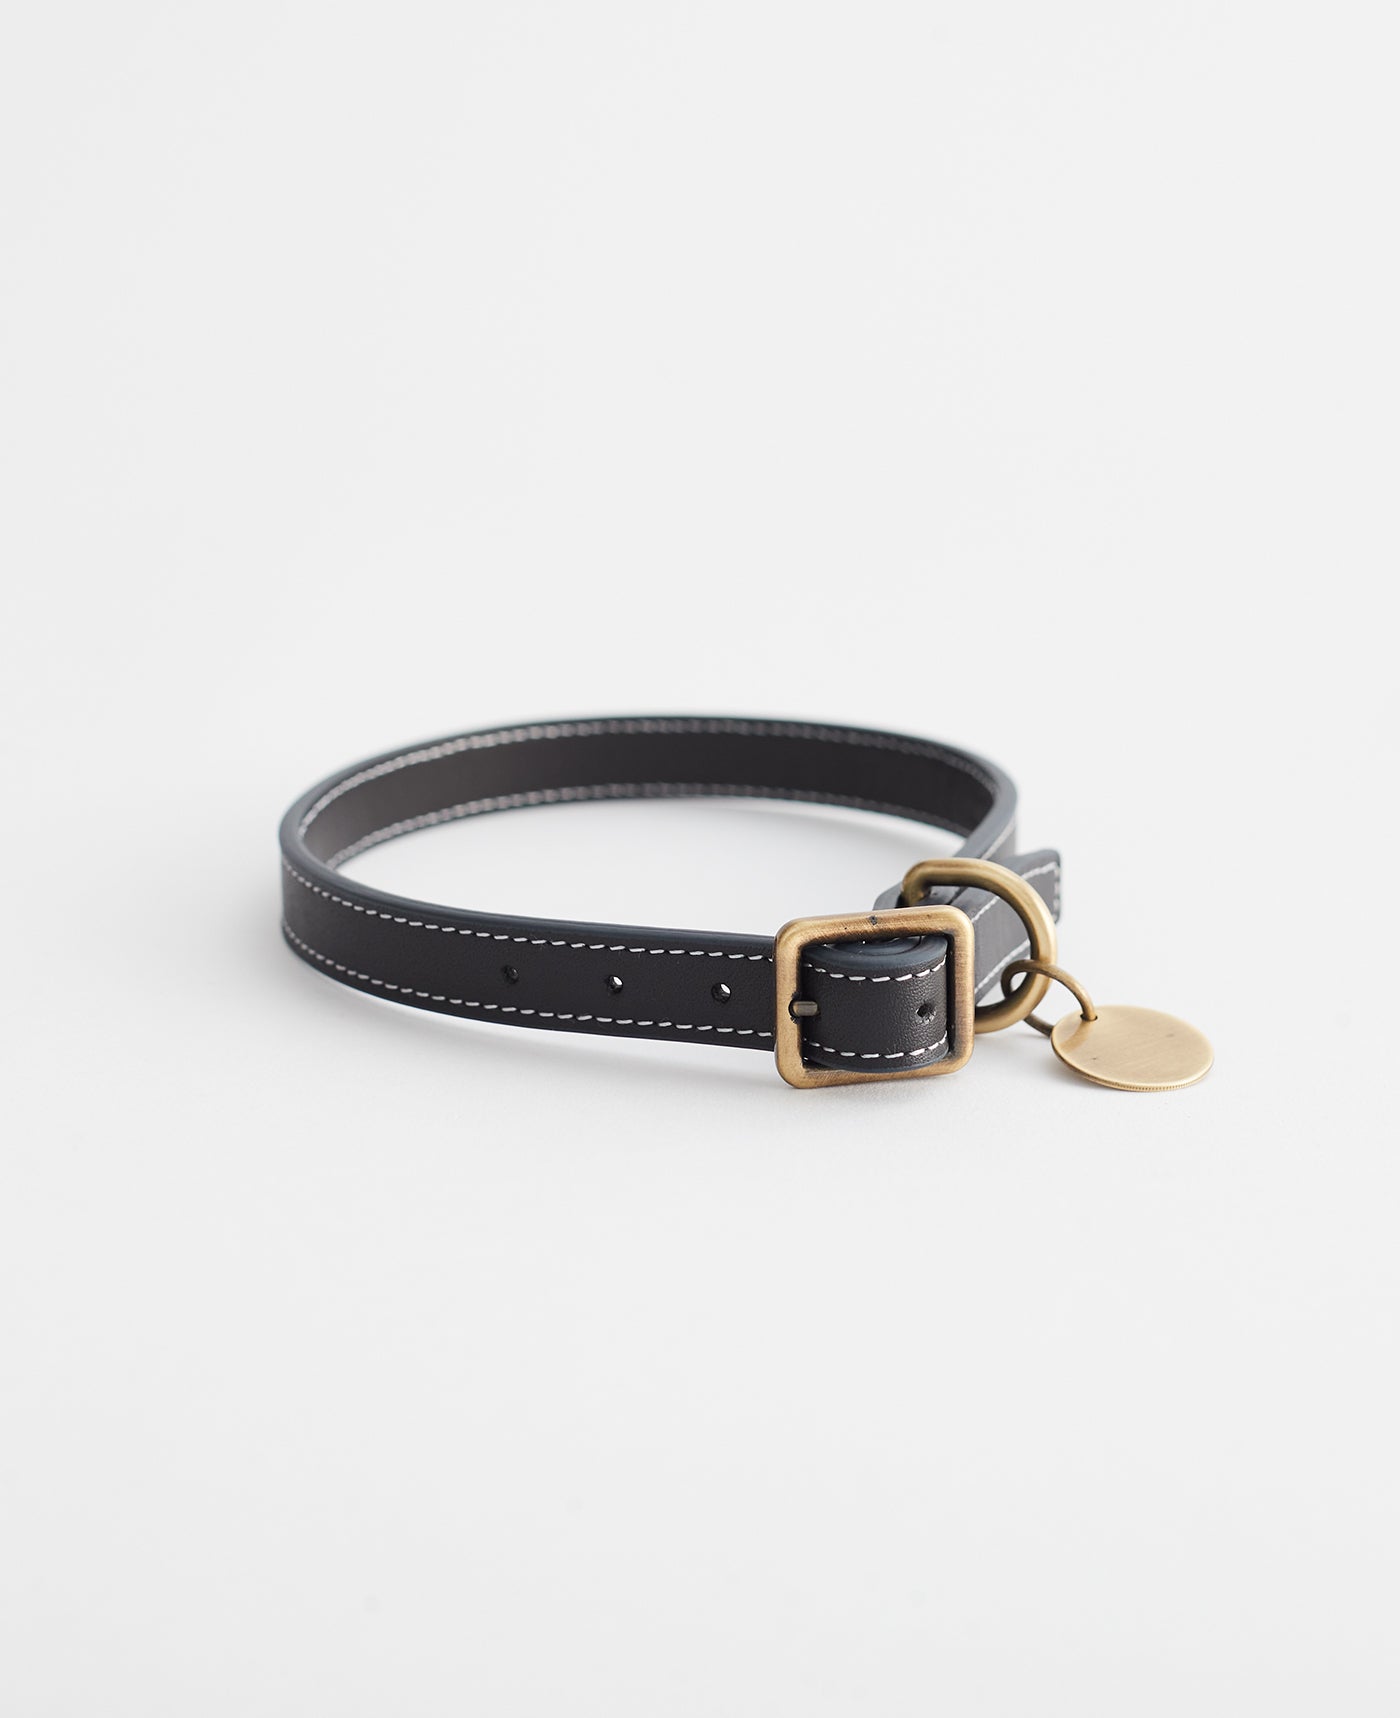 Leather Dog Collar in Black - Size Large by The Horse®